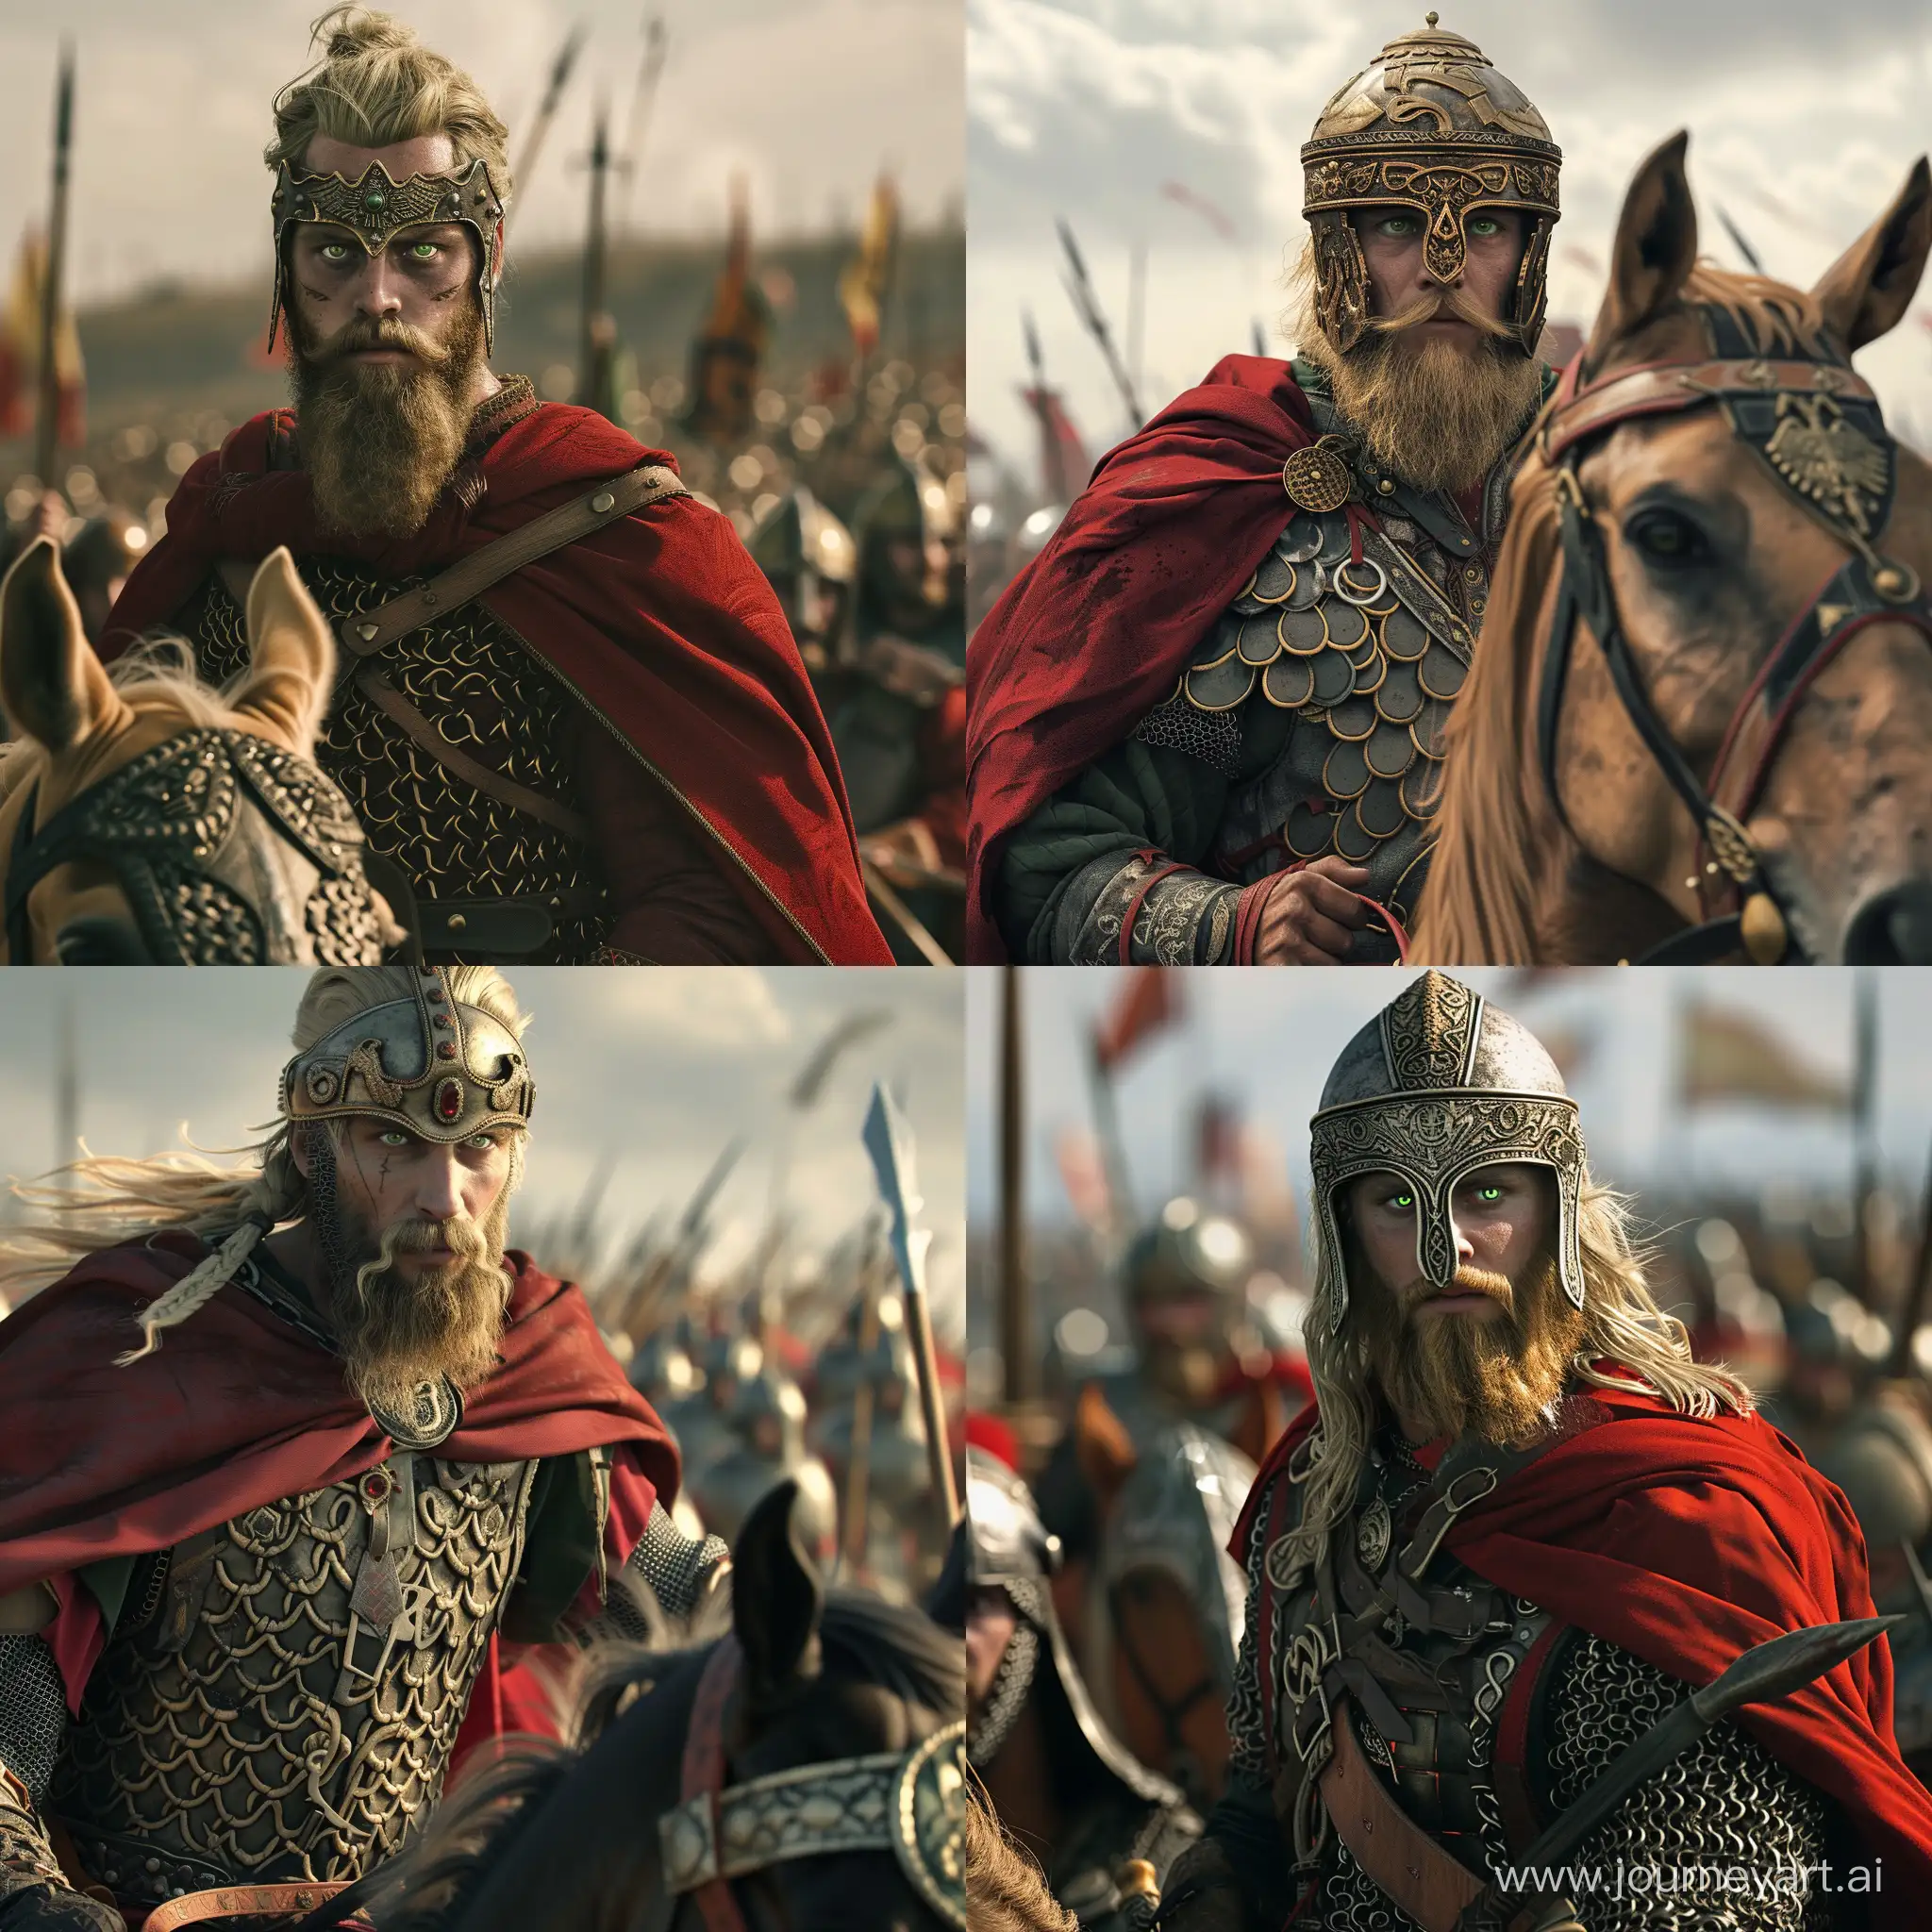 Kievan Rus chieftain Rurik on horse at battle field. He has blonde beard and dark green eyes. Wearing lamellar armor, red cape and helmet with aventail. He orders his army to charge. Cinematic shot. Realistic. HD.